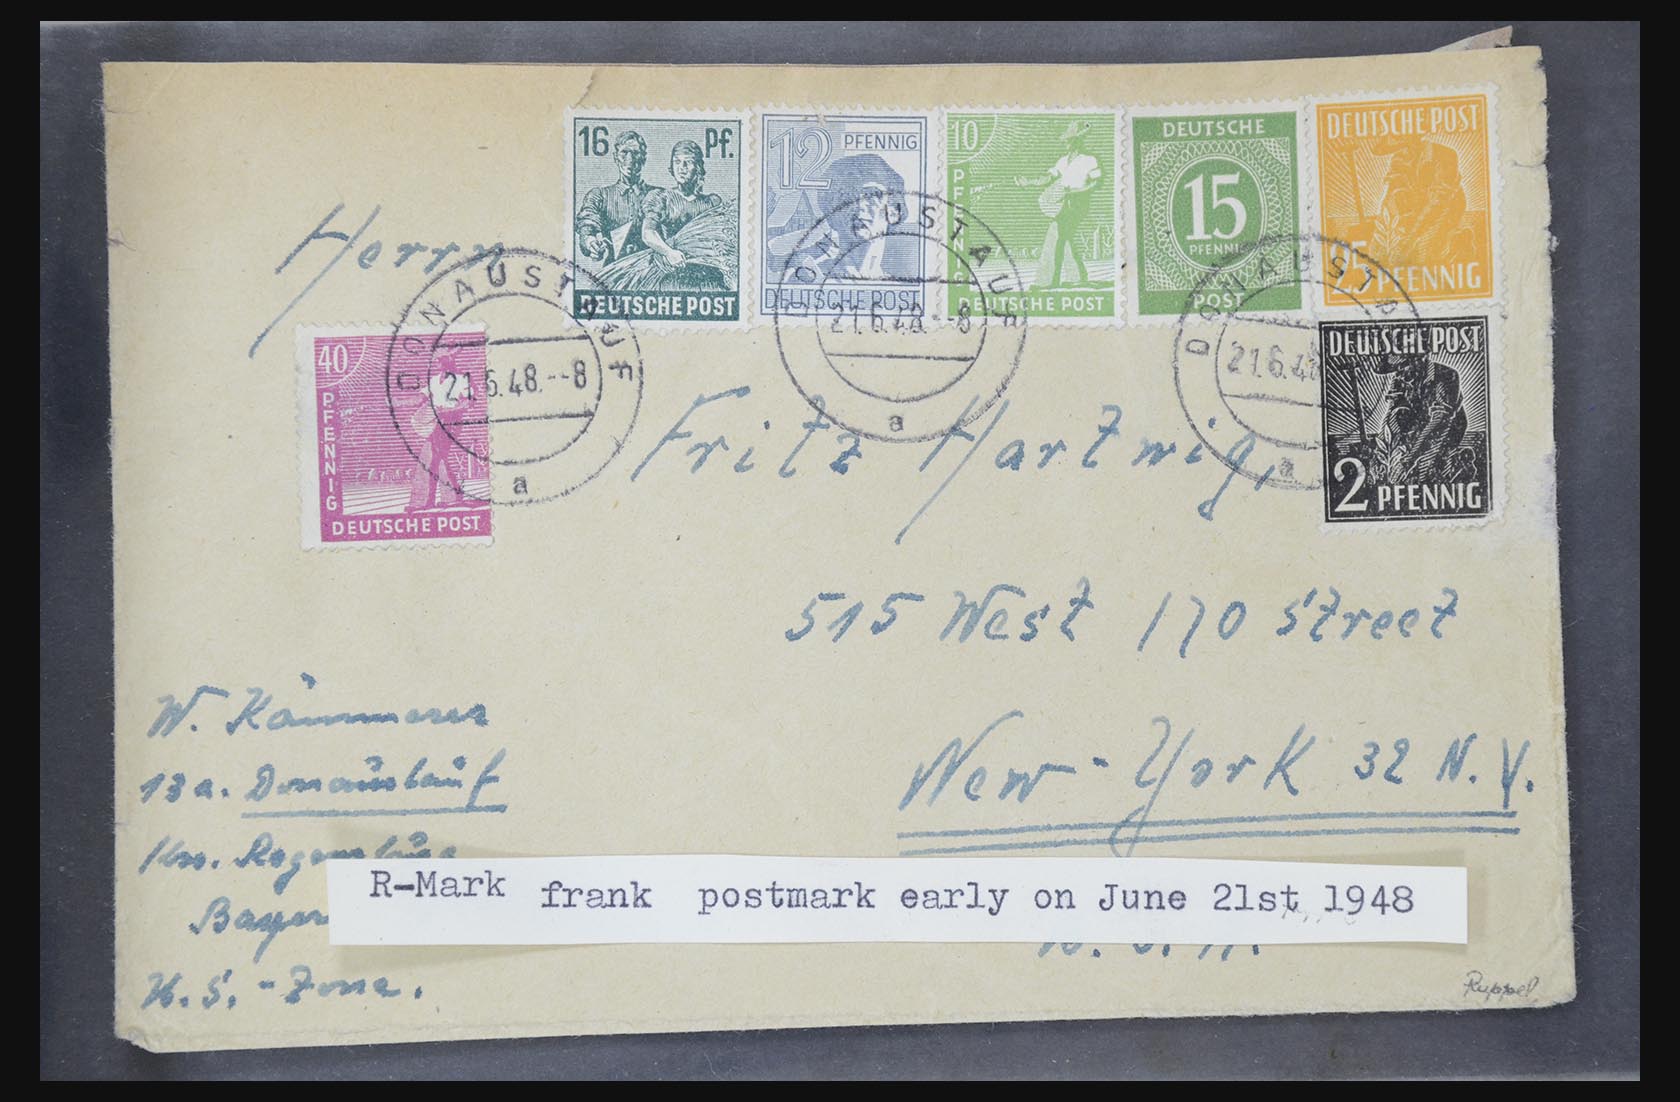 31581 008 - 31581 Germany covers and FDC's 1945-1981.